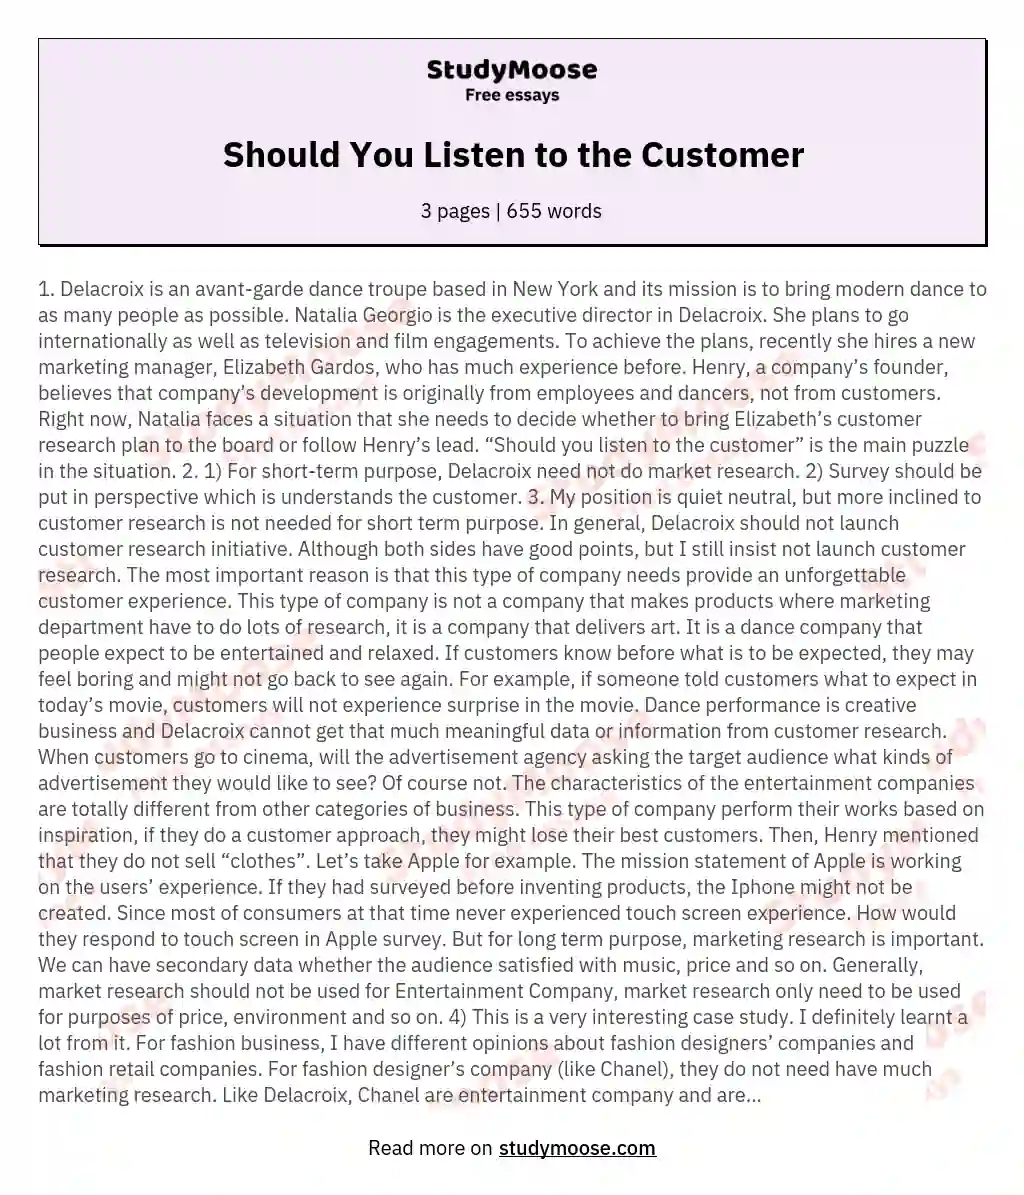 Should You Listen to the Customer essay